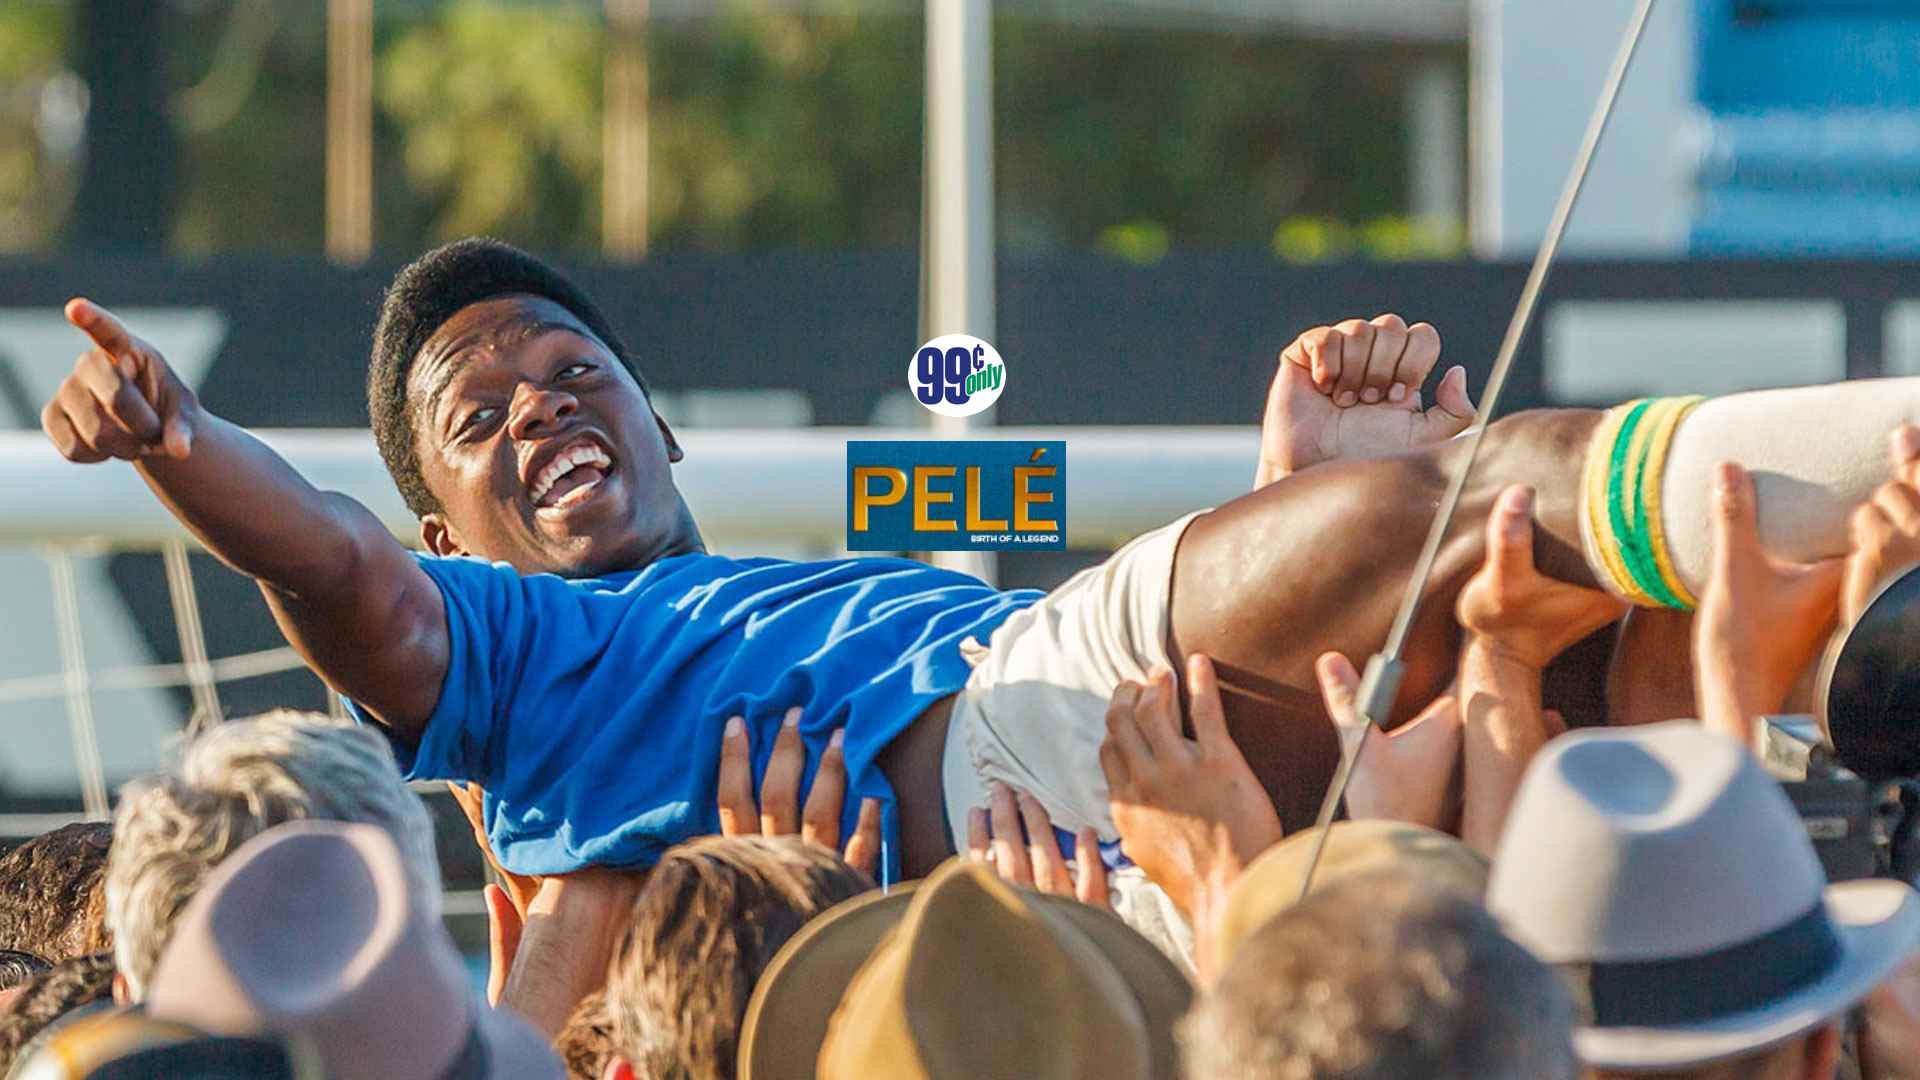 Geek insider, geekinsider, geekinsider. Com,, the itunes 99 cent movie of the week - 'pelé: birth of a legend', entertainment